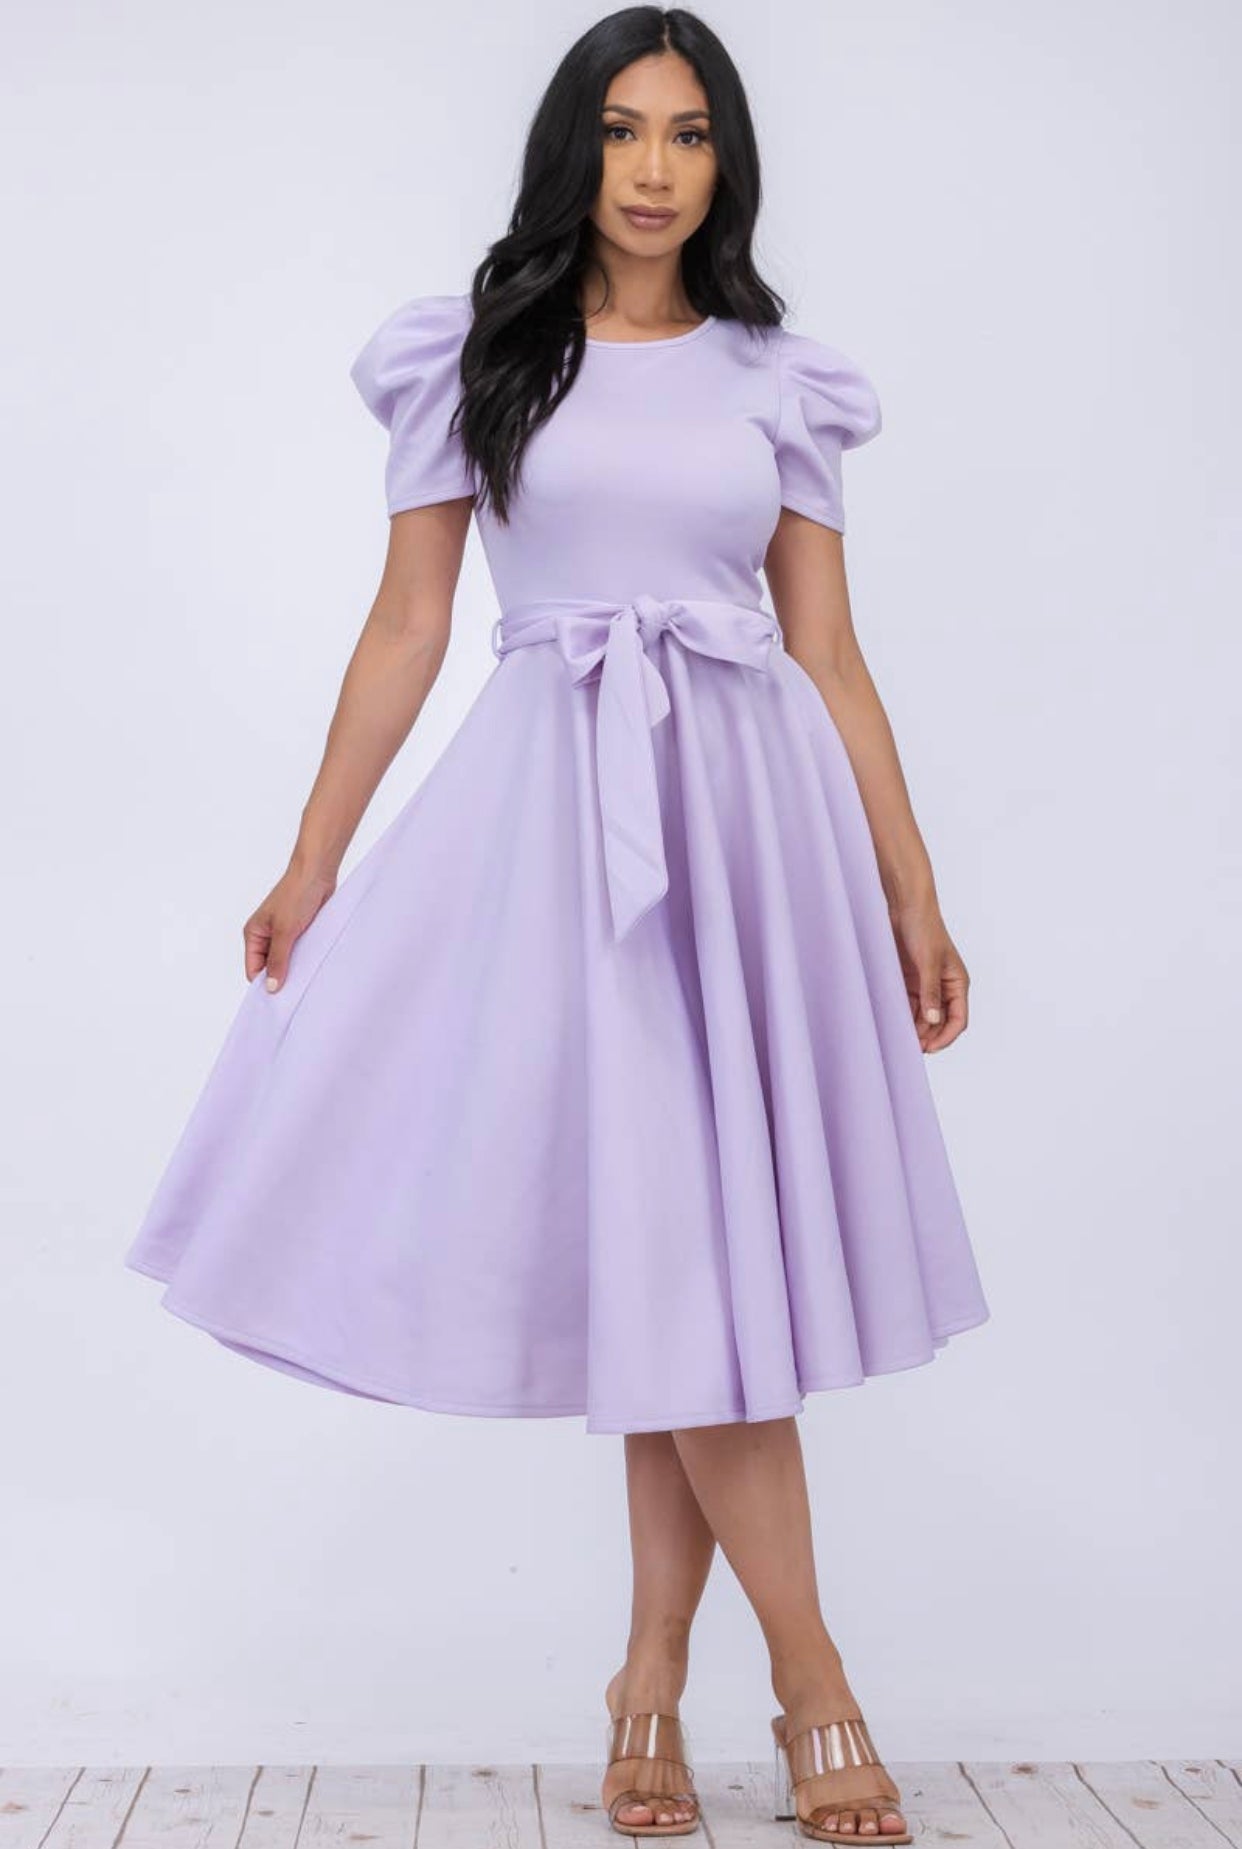 Puff Sleeve Cocktail Dress, Sizes 1X - 3X (Lavender)